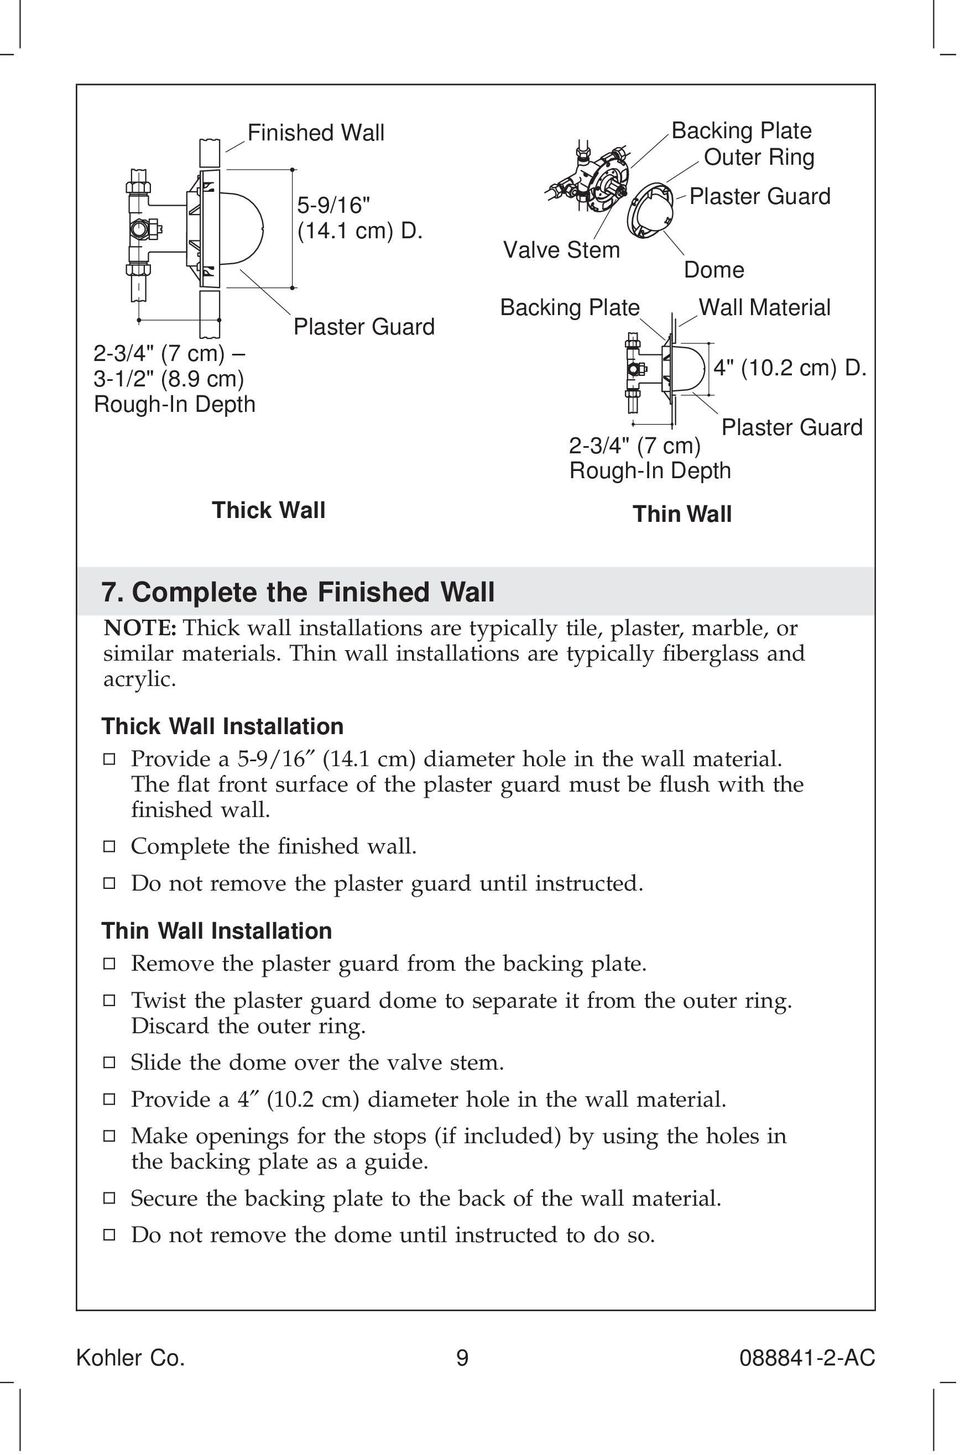 Complete the Finished Wall NOTE: Thick wall installations are typically tile, plaster, marble, or similar materials. Thin wall installations are typically fiberglass and acrylic.